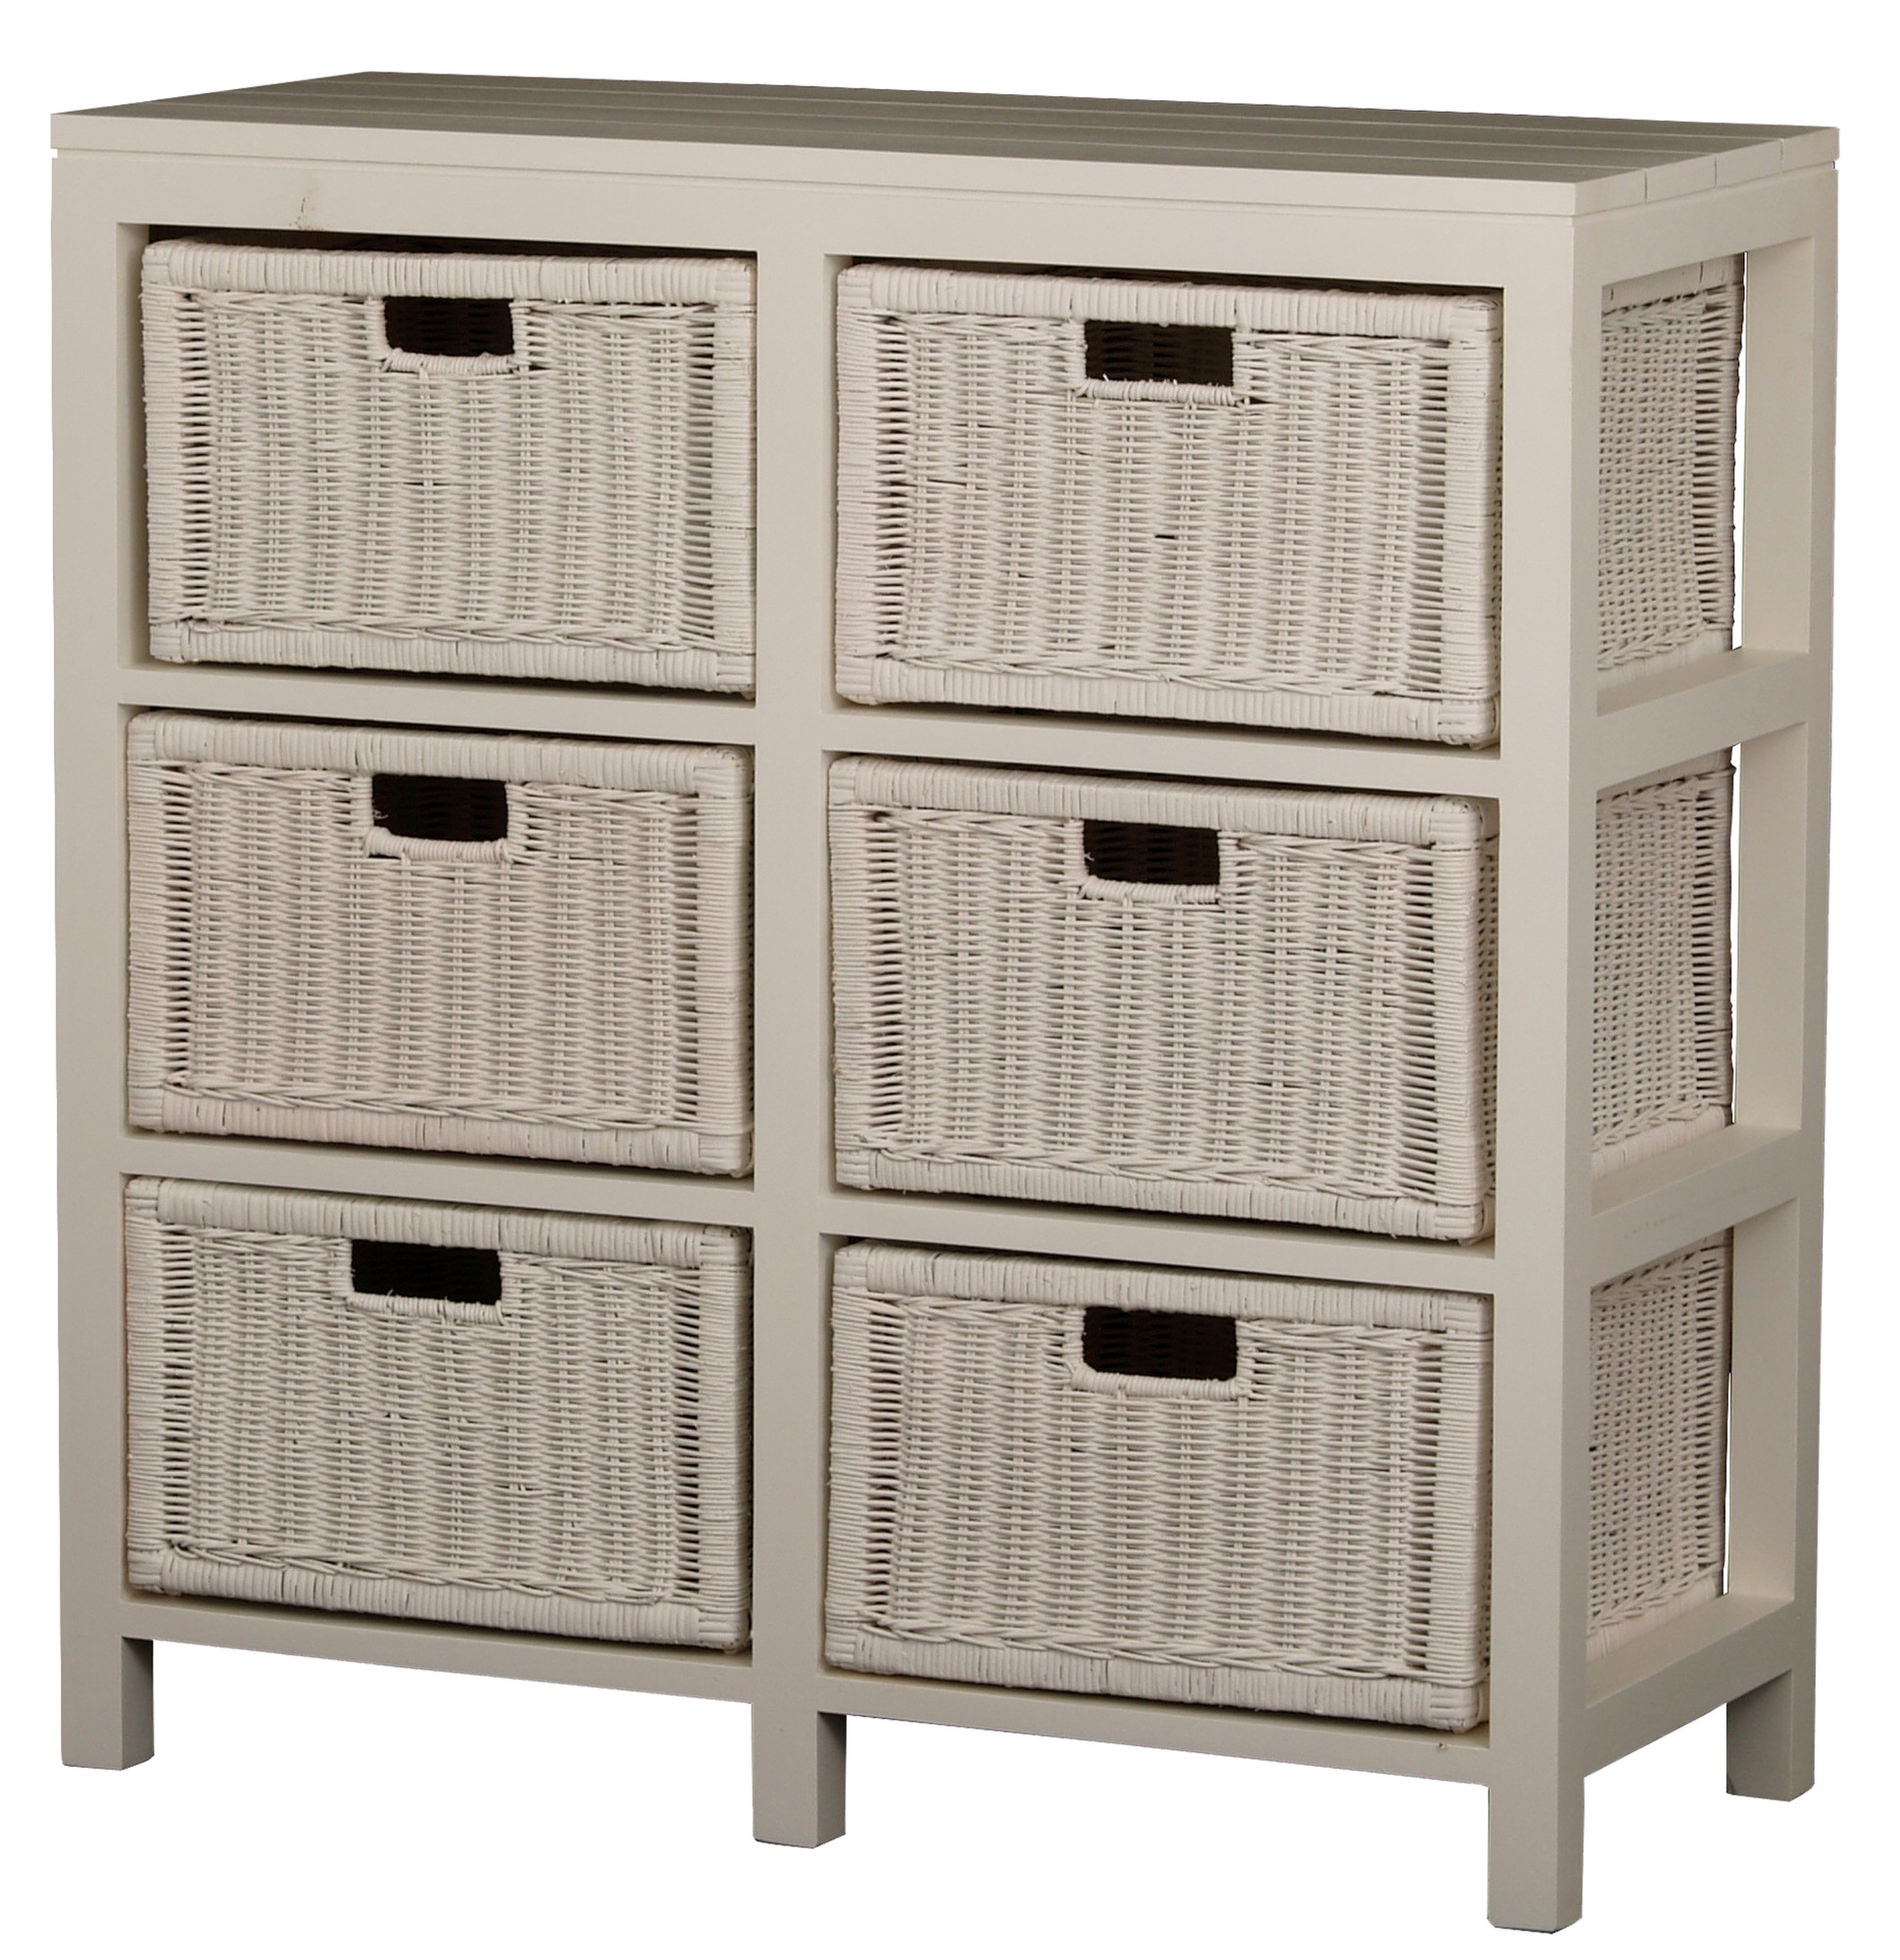 White Rattan Dresser For American Girl Dolls Storage Drawers By